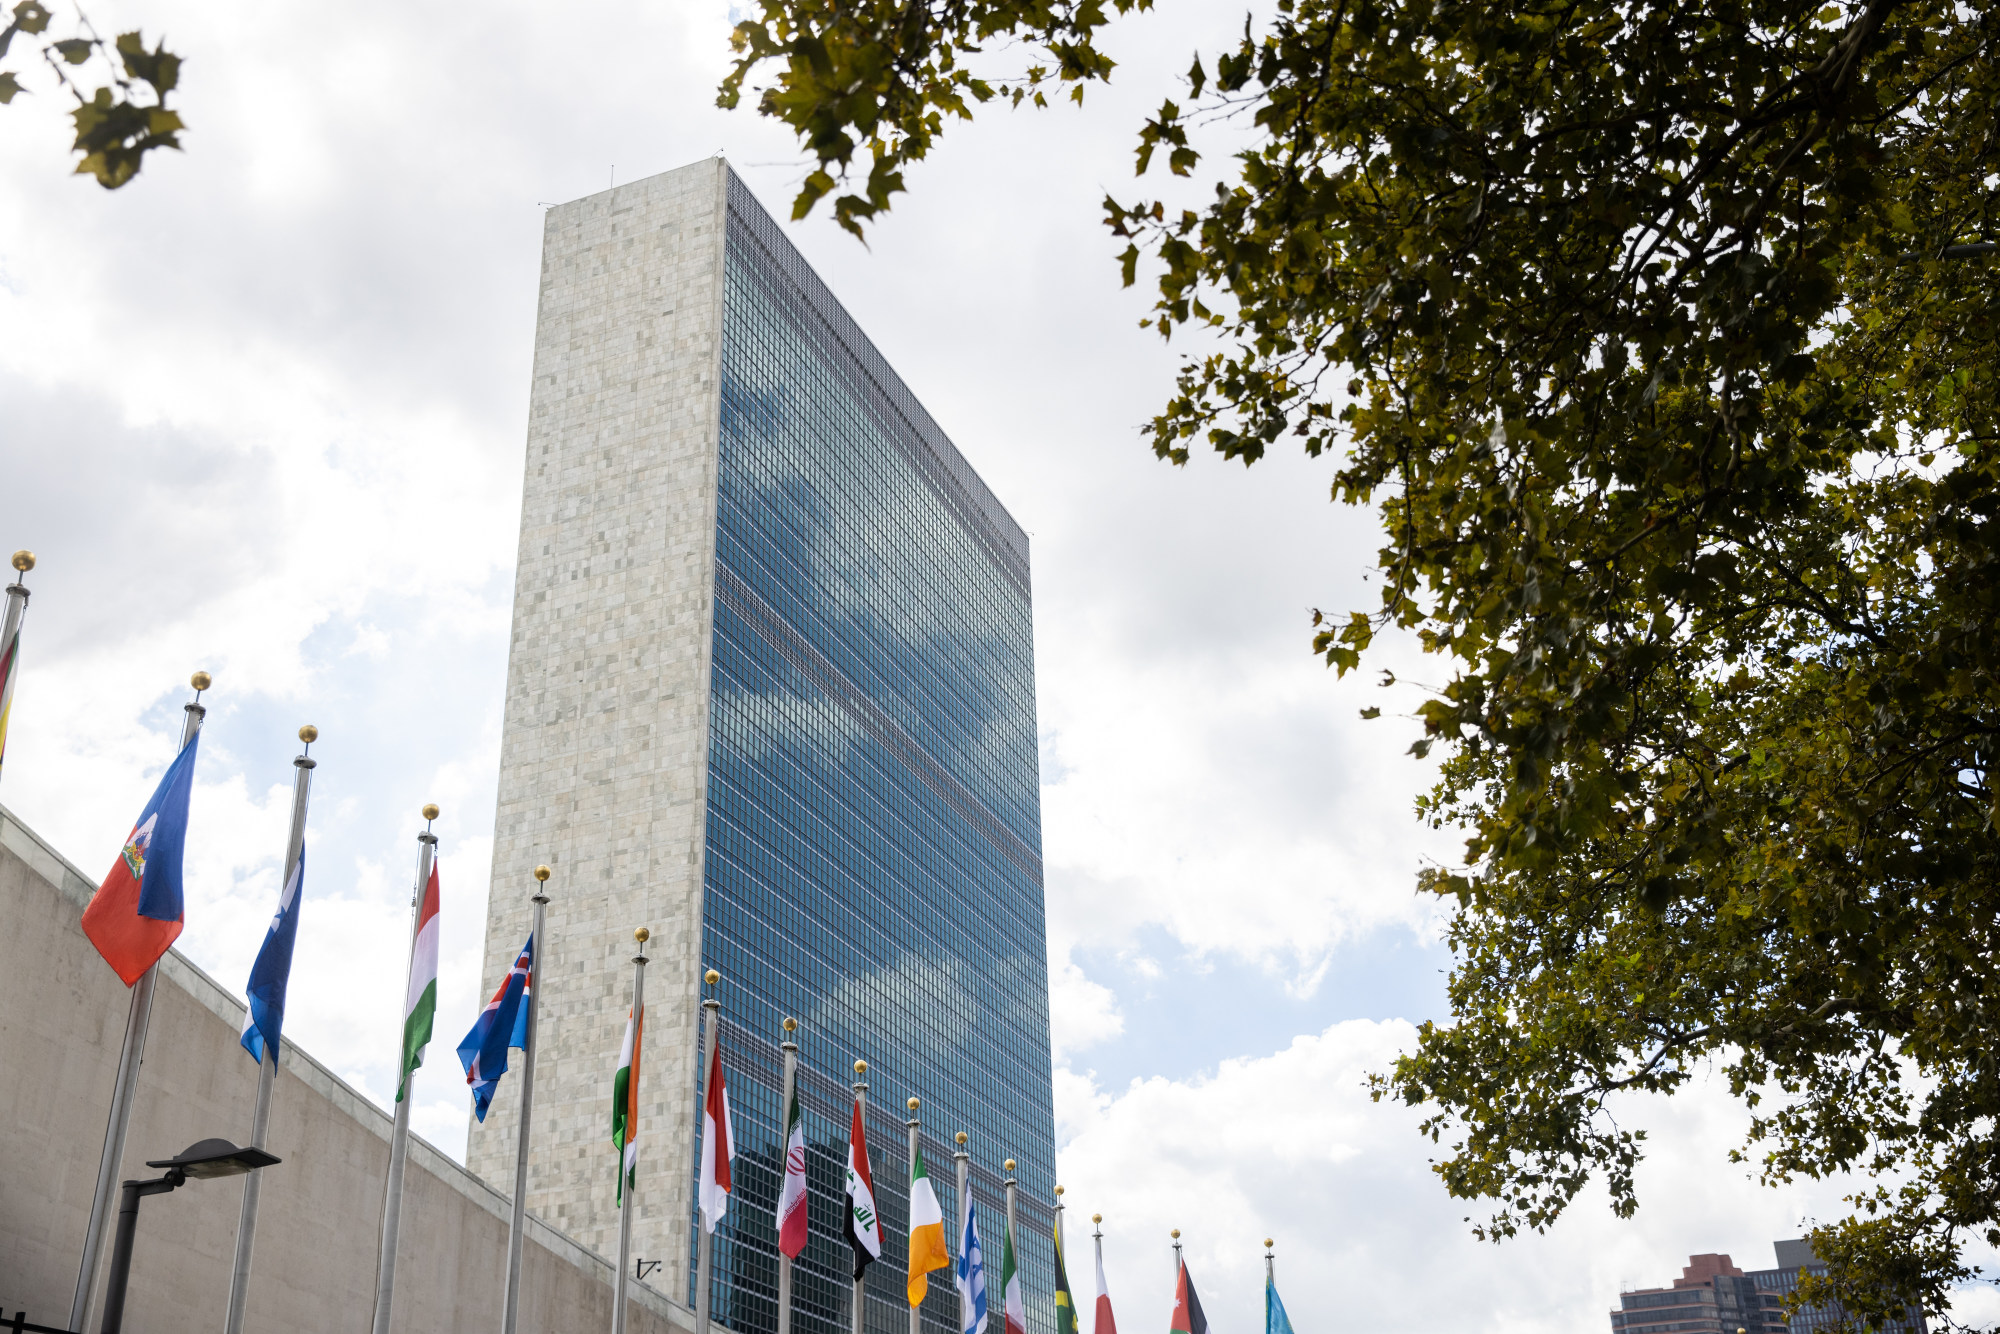 The United Nations headquarters in New York. The US assumes leadership of the Security Council for a month. Photo: Bloomberg